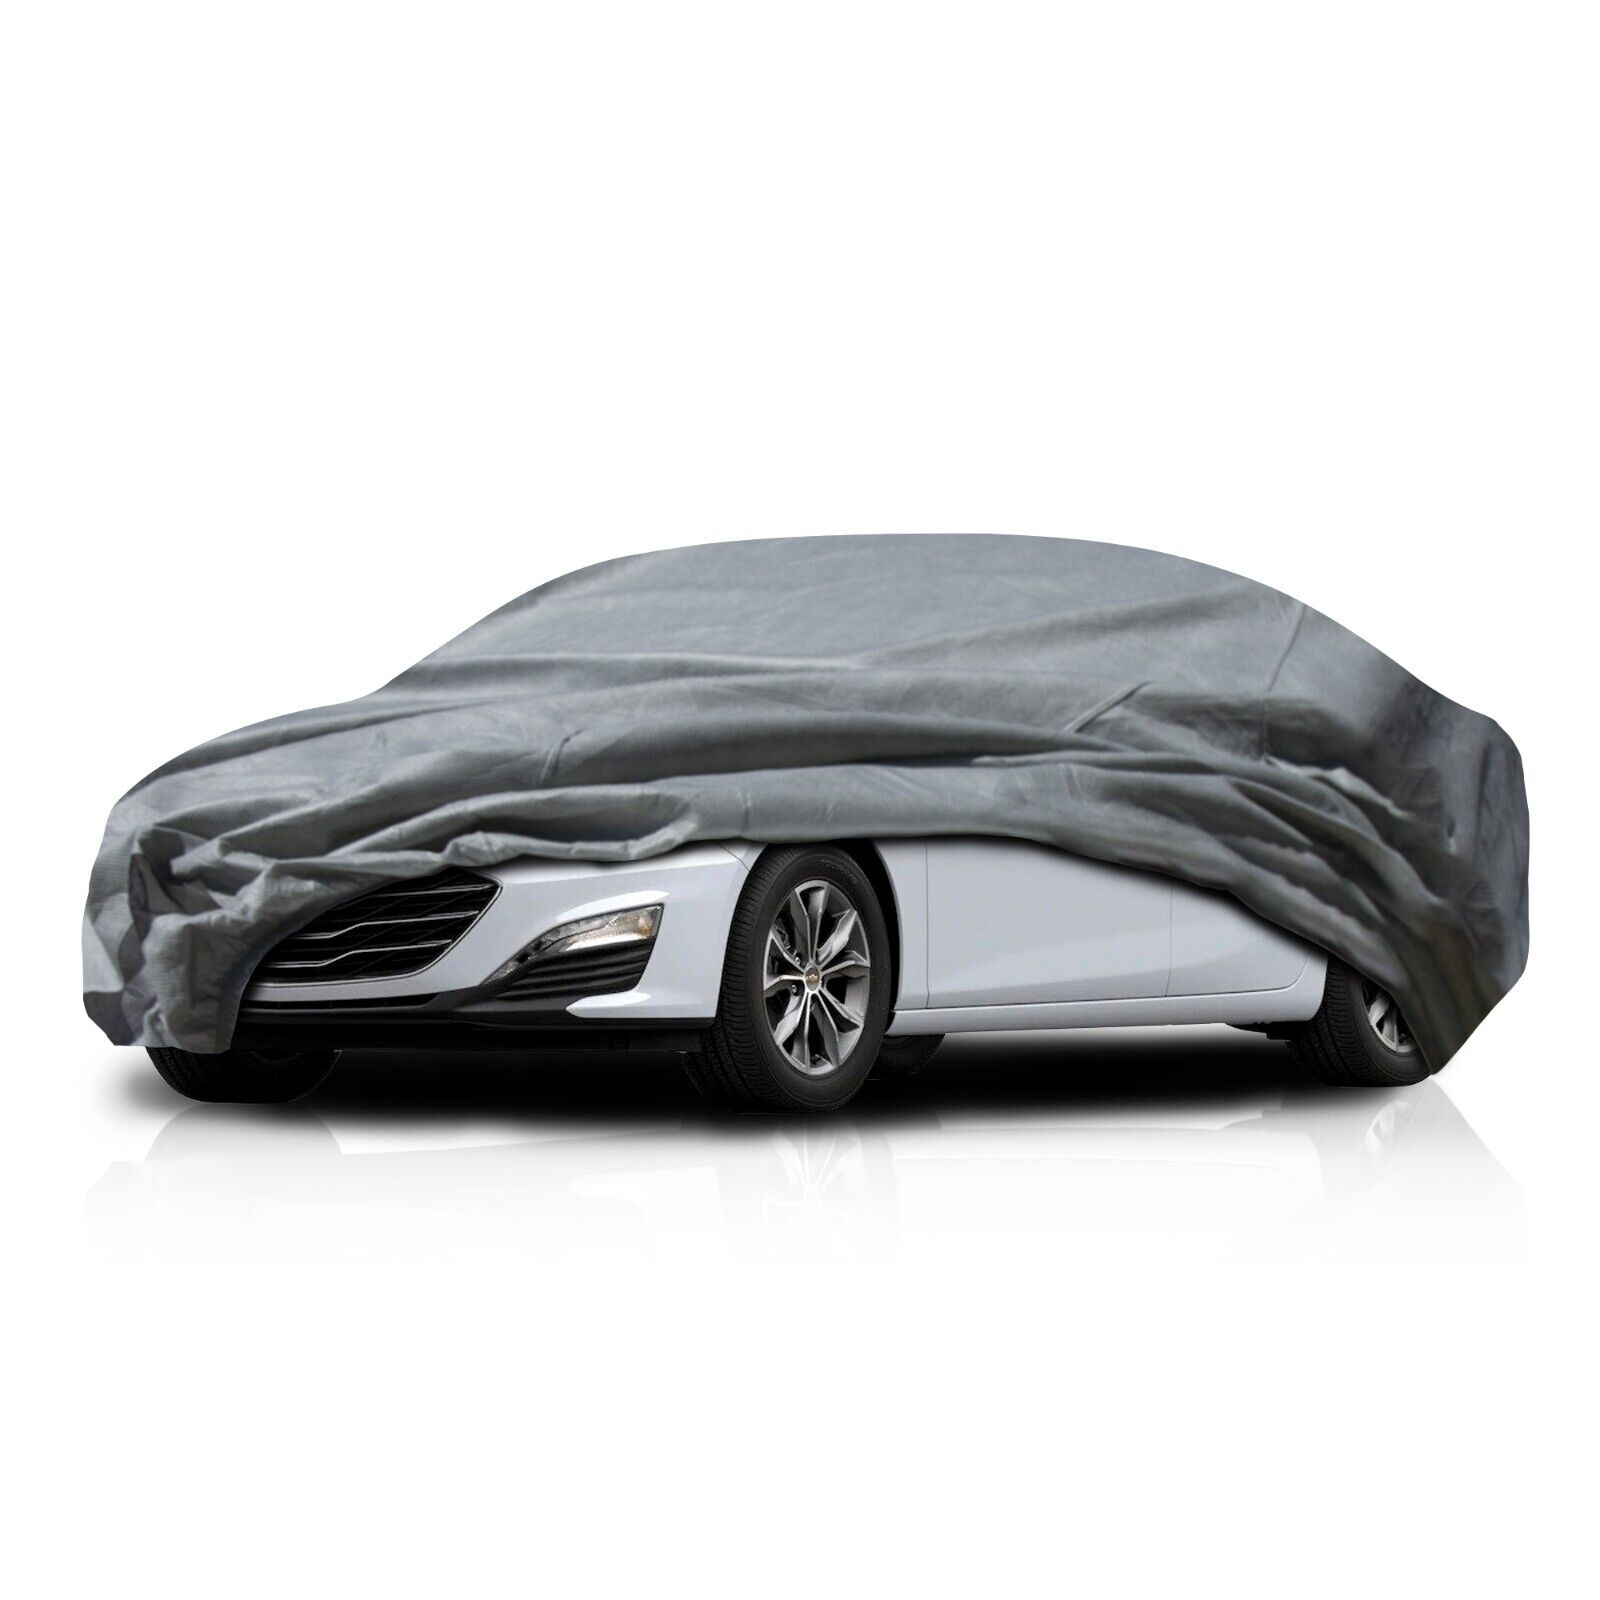 WeatherTec Plus HD Water Resistant Car Cover for 1984-1996 Nissan 300ZX 2+2